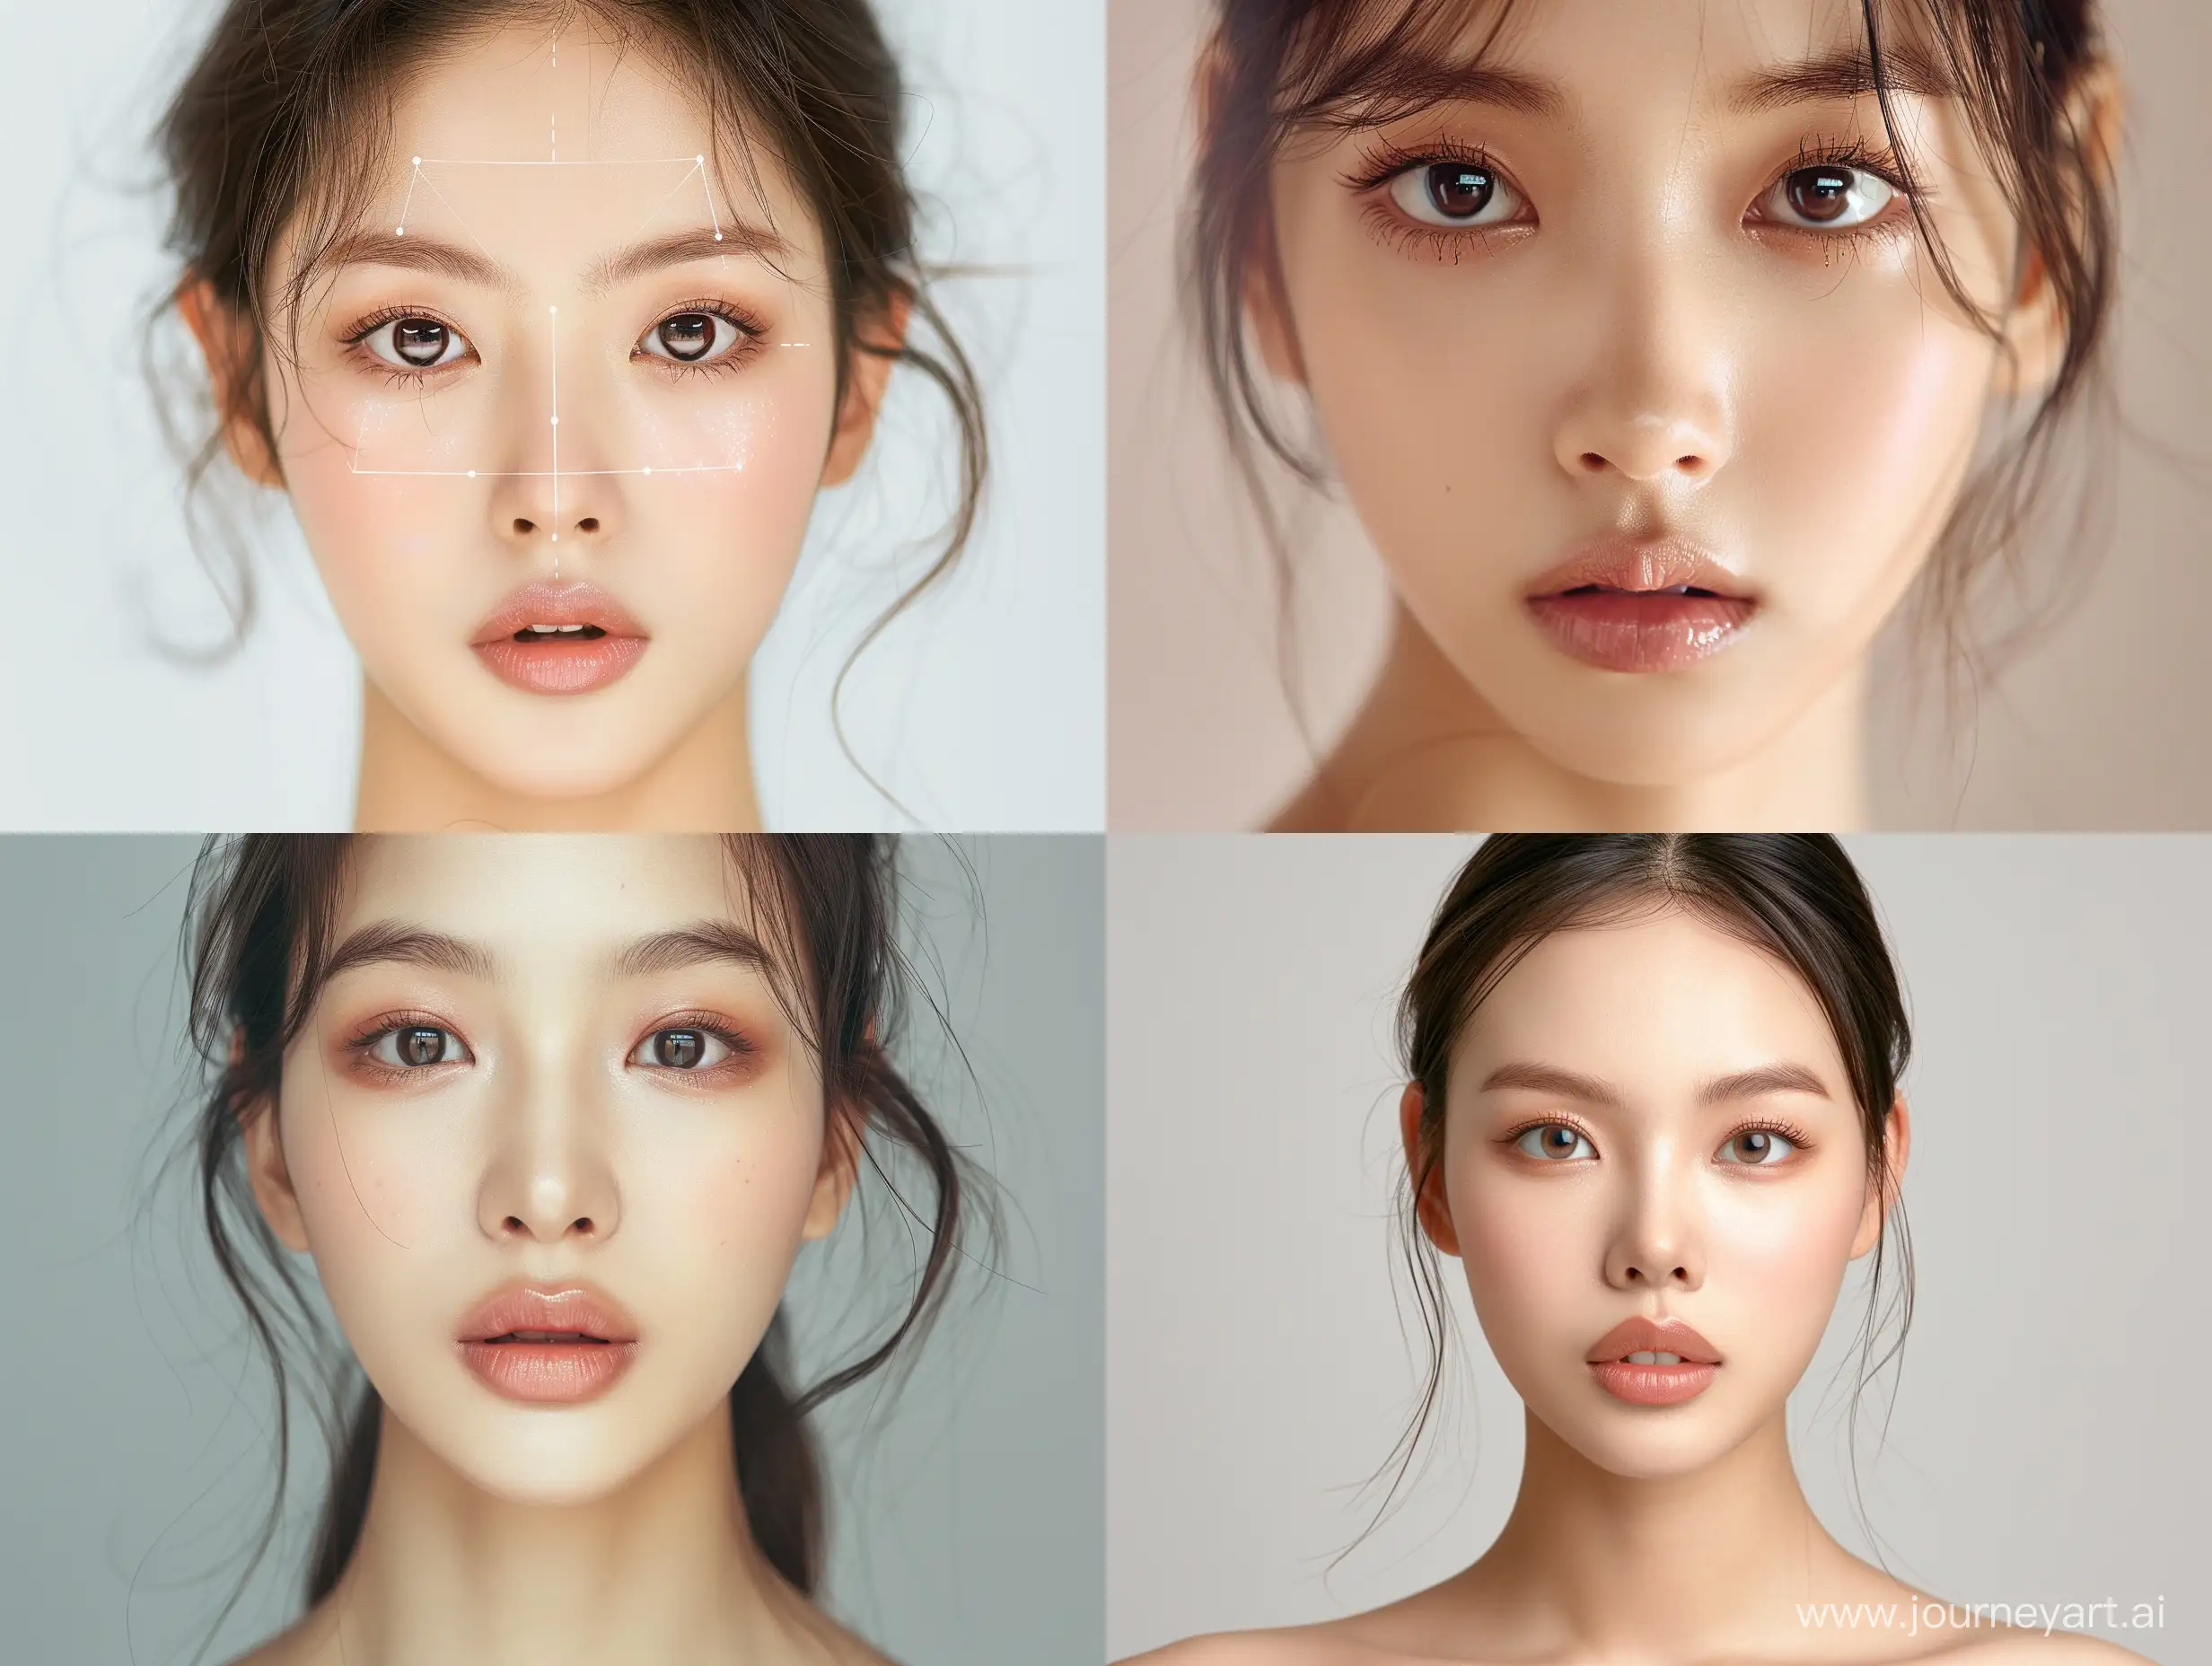 A beautiful Asian woman with wide-set eyes, a youthful appearance, and facial features resembling Blackpink's Jennie. Headshot, without makeup, --v 6